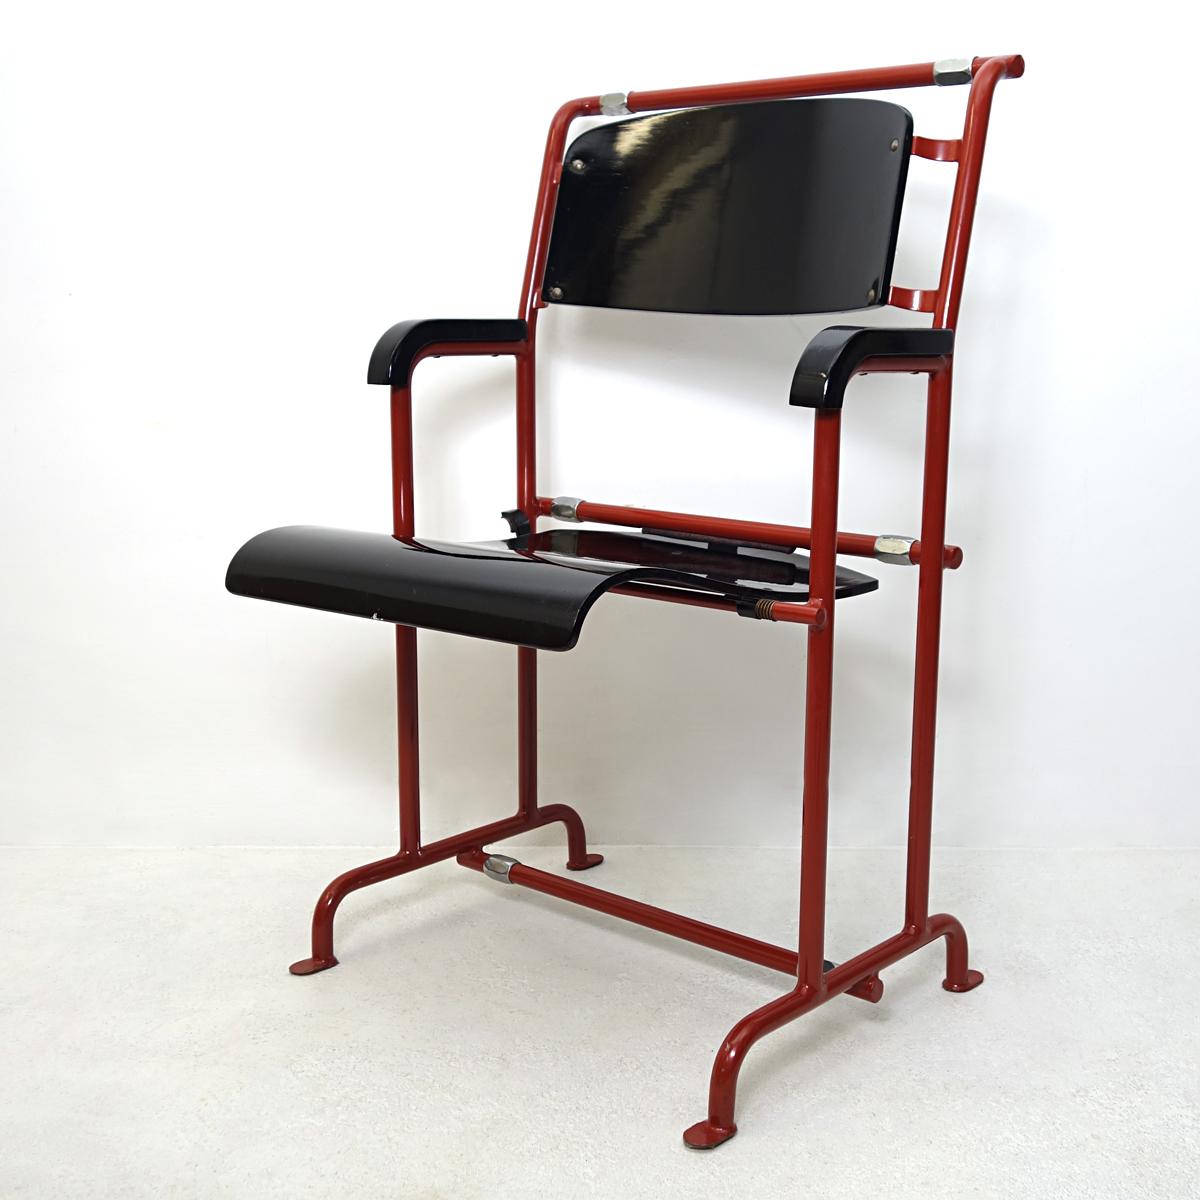 This piece is unmistakably a Rietveld!
In 1932 Gerrit Rietveld designed a folding chair for the Hopmi bicycle parts factory for the Vreeburg cinema in Utrecht, the cinema in the apartment above Rietveld lived with his family.
Hopmi used patented